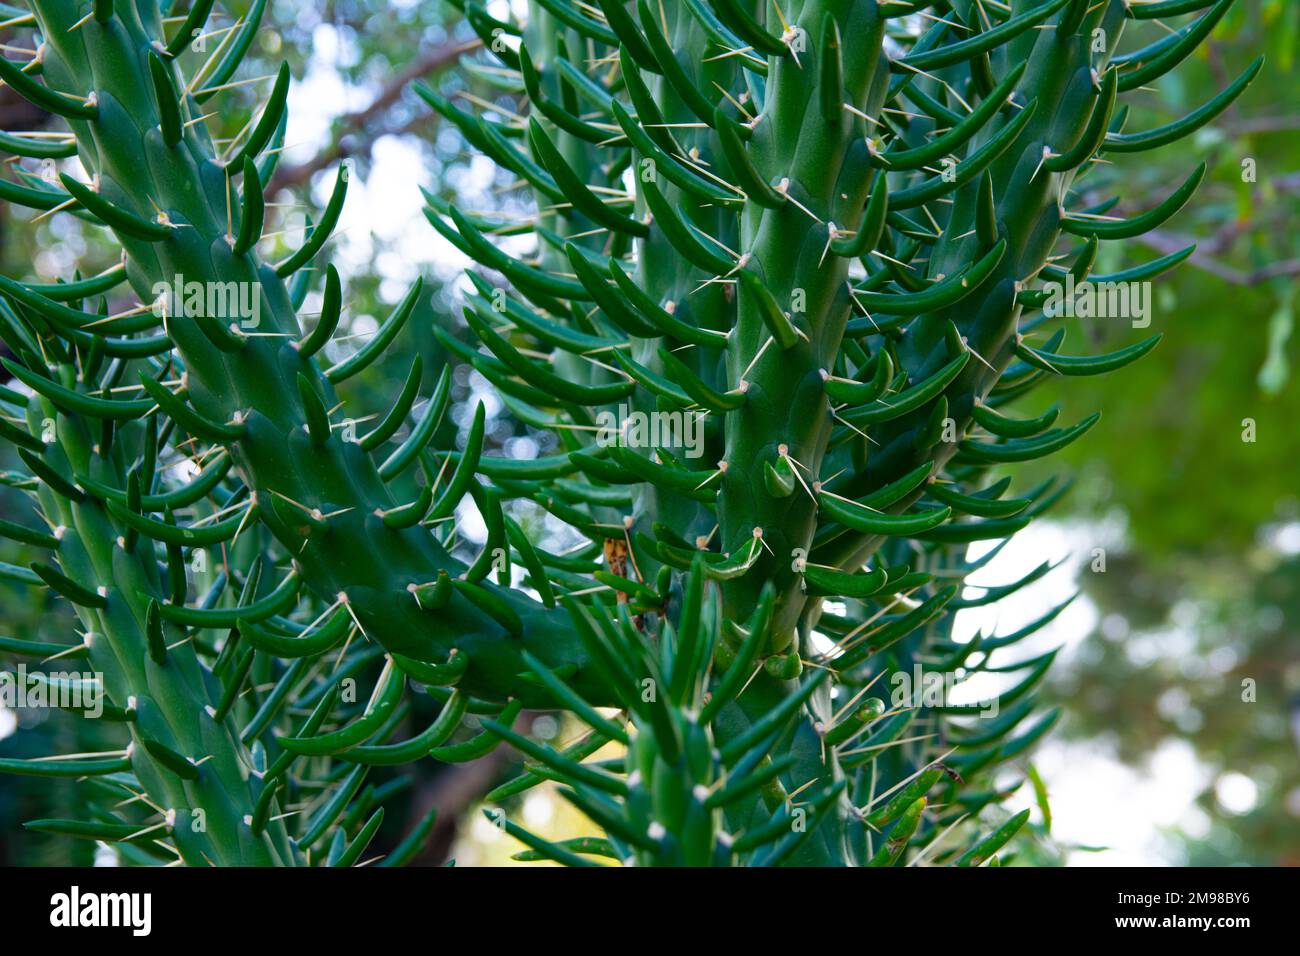 Austrocylindropuntia subulata. Eve's Needle Cactus. Close up of needles and leaves of cactus. Close up of succulent species Stock Photo